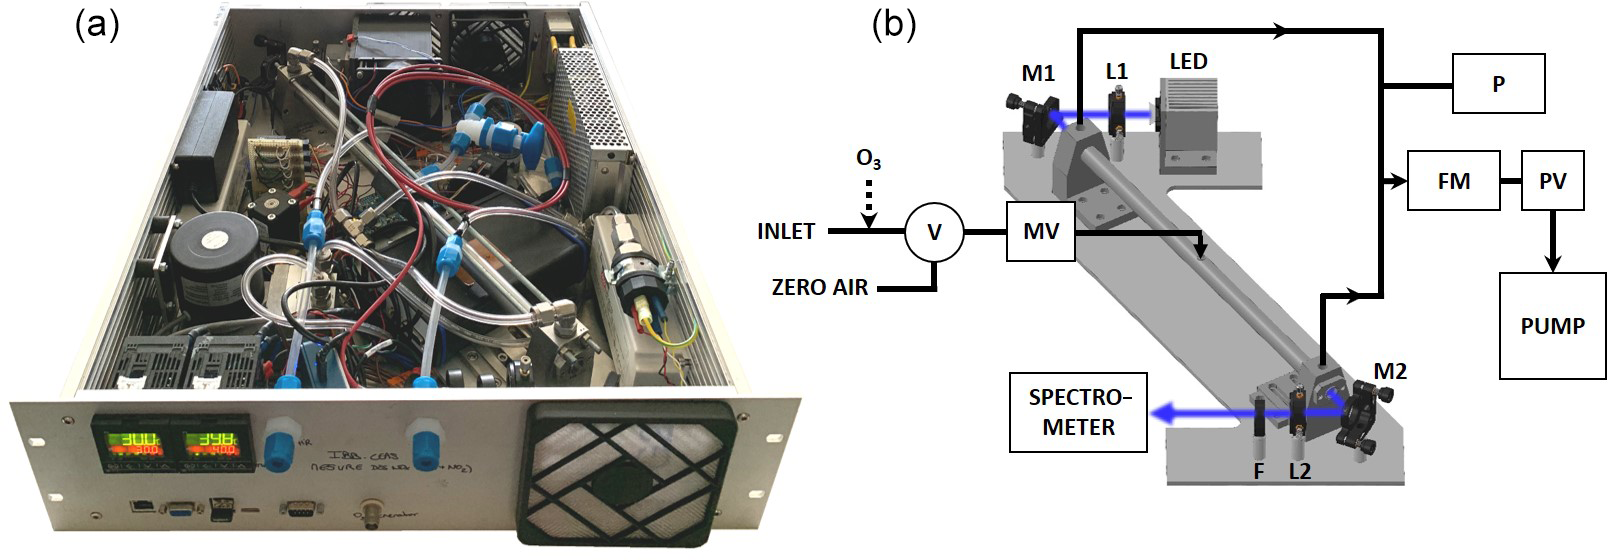 Amt A Compact Incoherent Broadband Cavity Enhanced Absorption Spectrometer For Trace Detection Of Nitrogen Oxides Iodine Oxide And Glyoxal At Levels Below Parts Per Billion For Field Applications